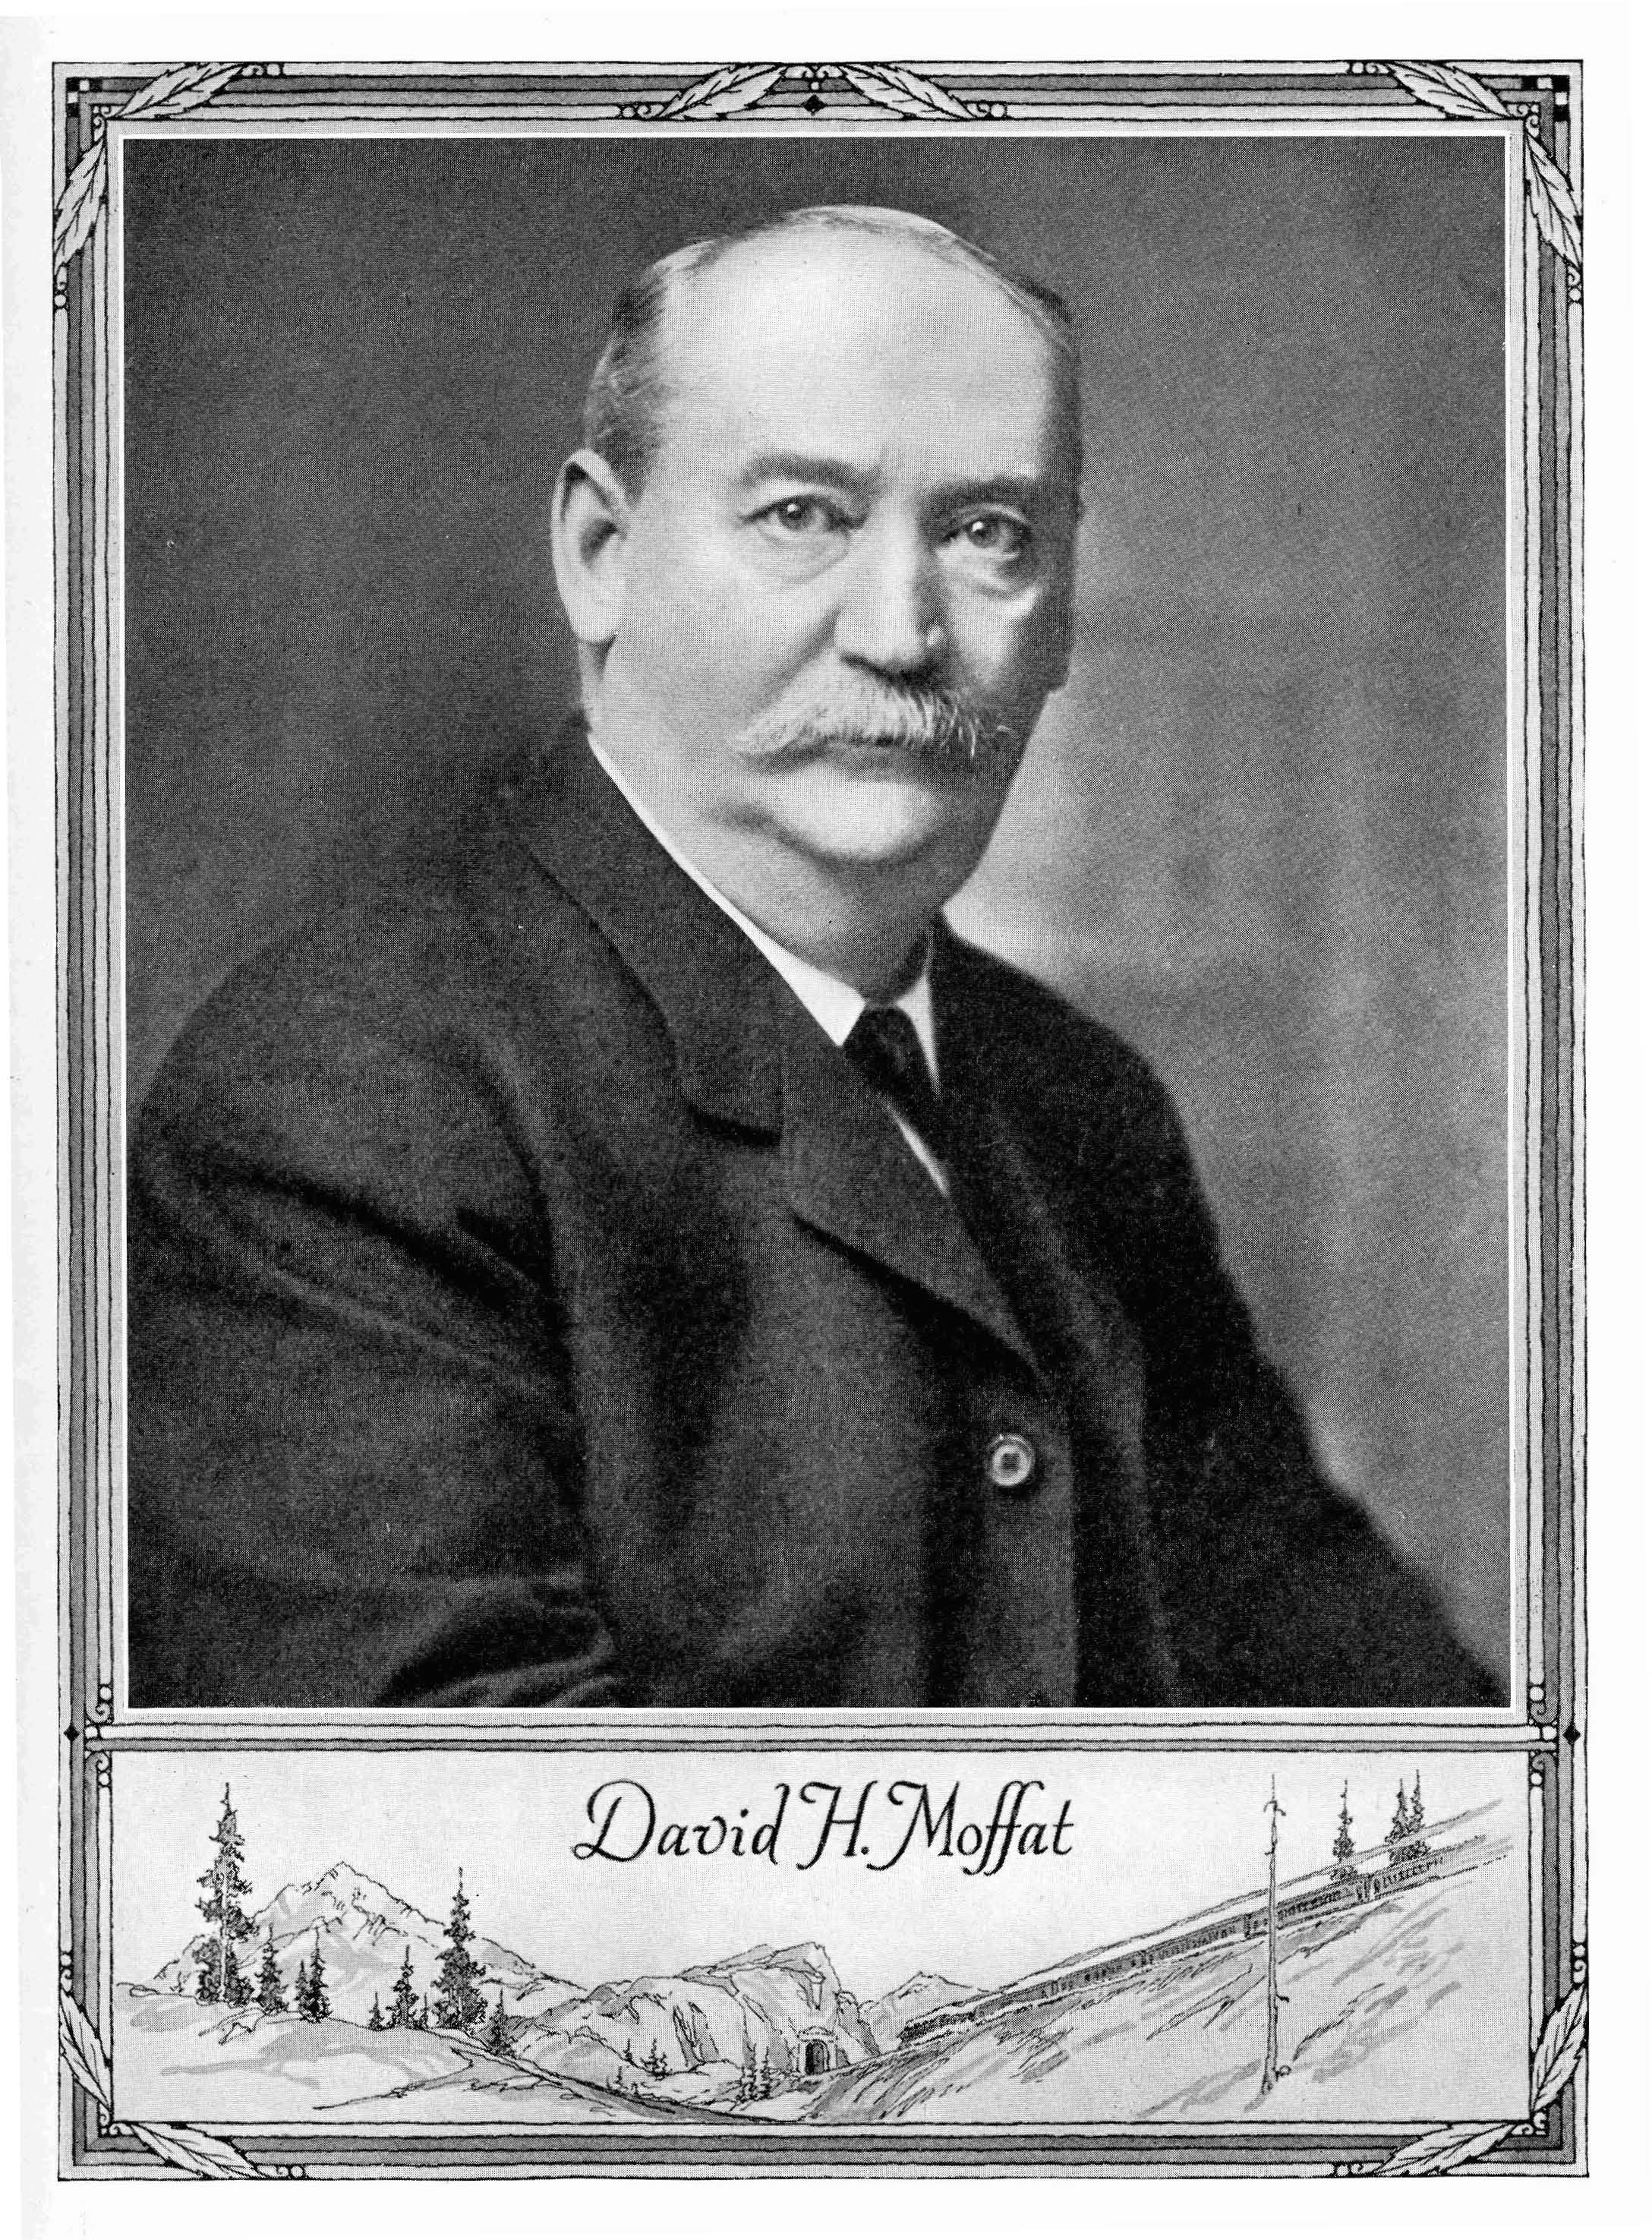 David Moffat (1839-1911) spent an estimated 14 million dollars building the railroad to Rollins Pass.